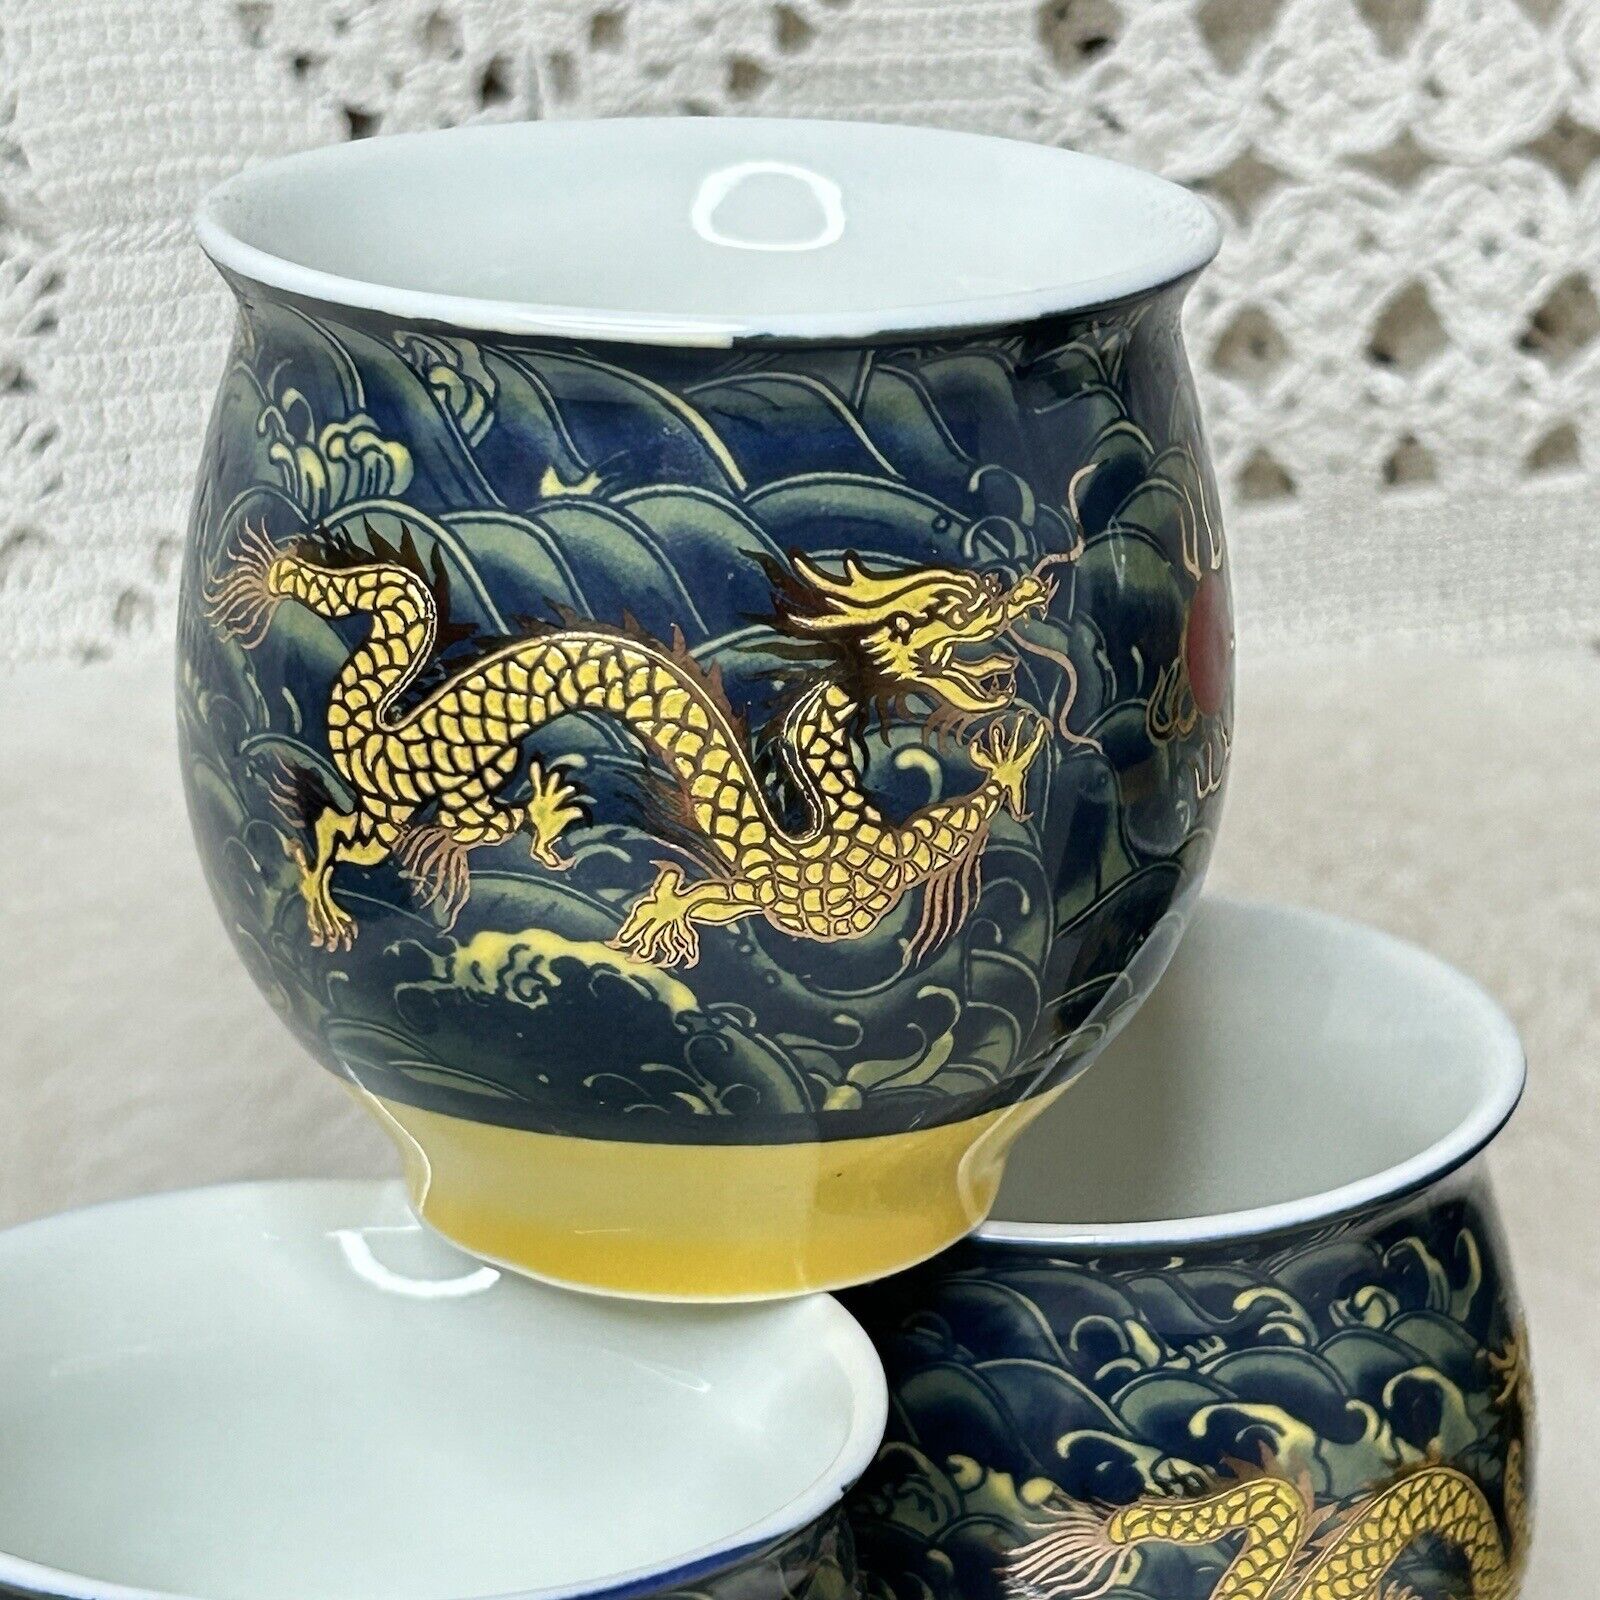 VTG Set 6 Chinese Hand Painted Golden Dragon Double Wall Porcelain Sake Tea Cups